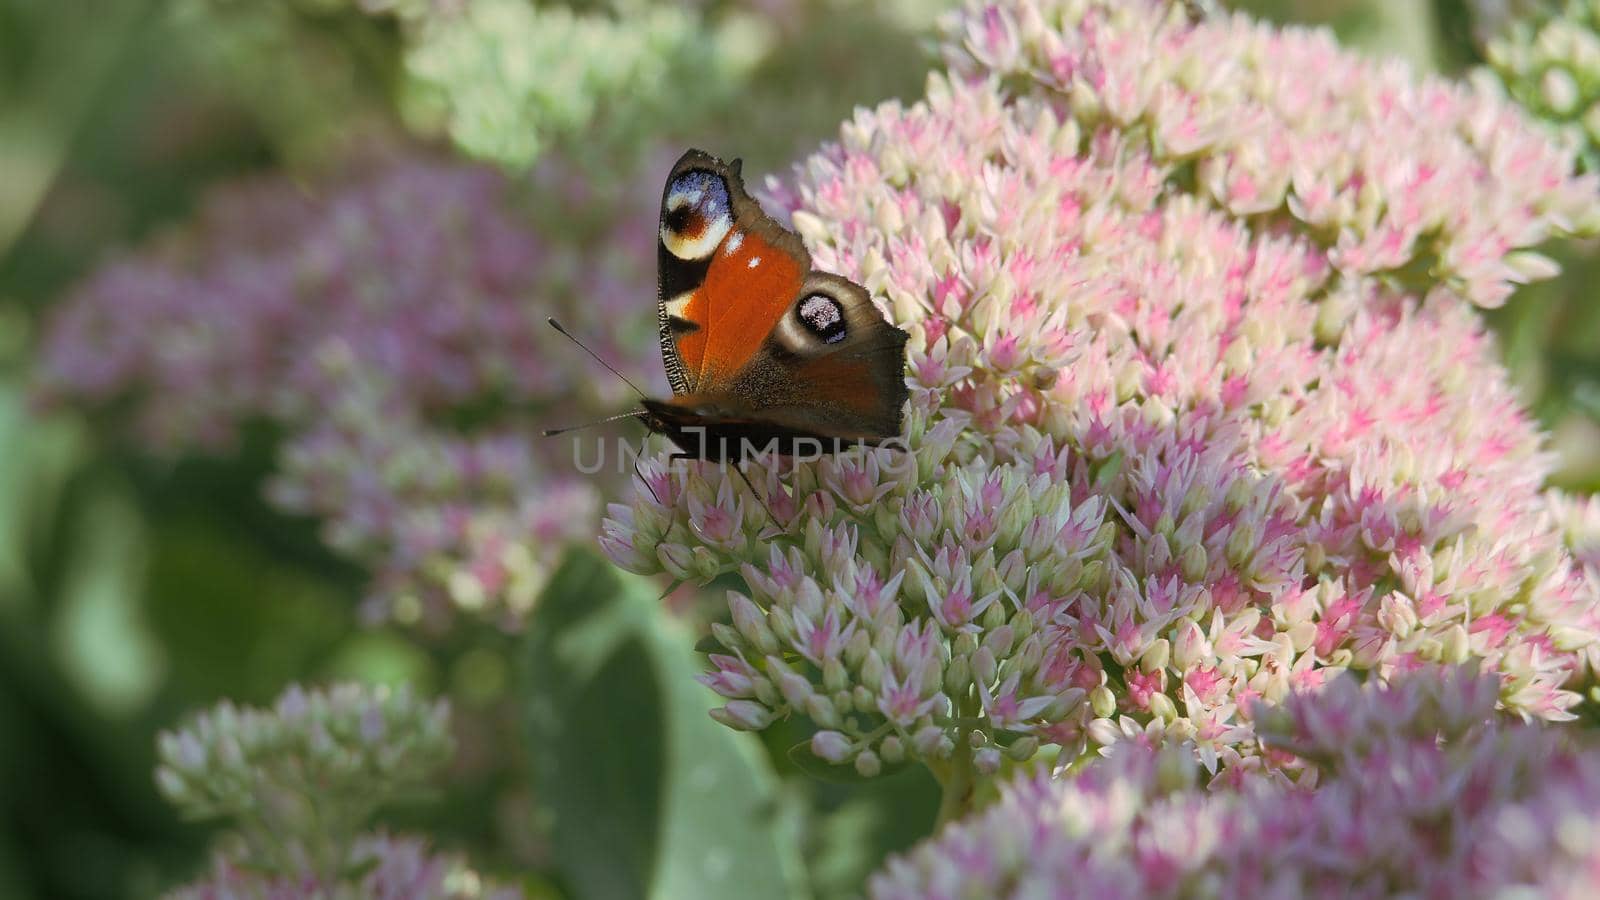 Inflorescence of a flowering plant, a prominent Ochitok. Sedum spectabile Boreau. Crassulaceae autumn. Pink and white flowers are swaying in the wind. Peacock eye butterfly on pink and white flowers swaying in the wind.